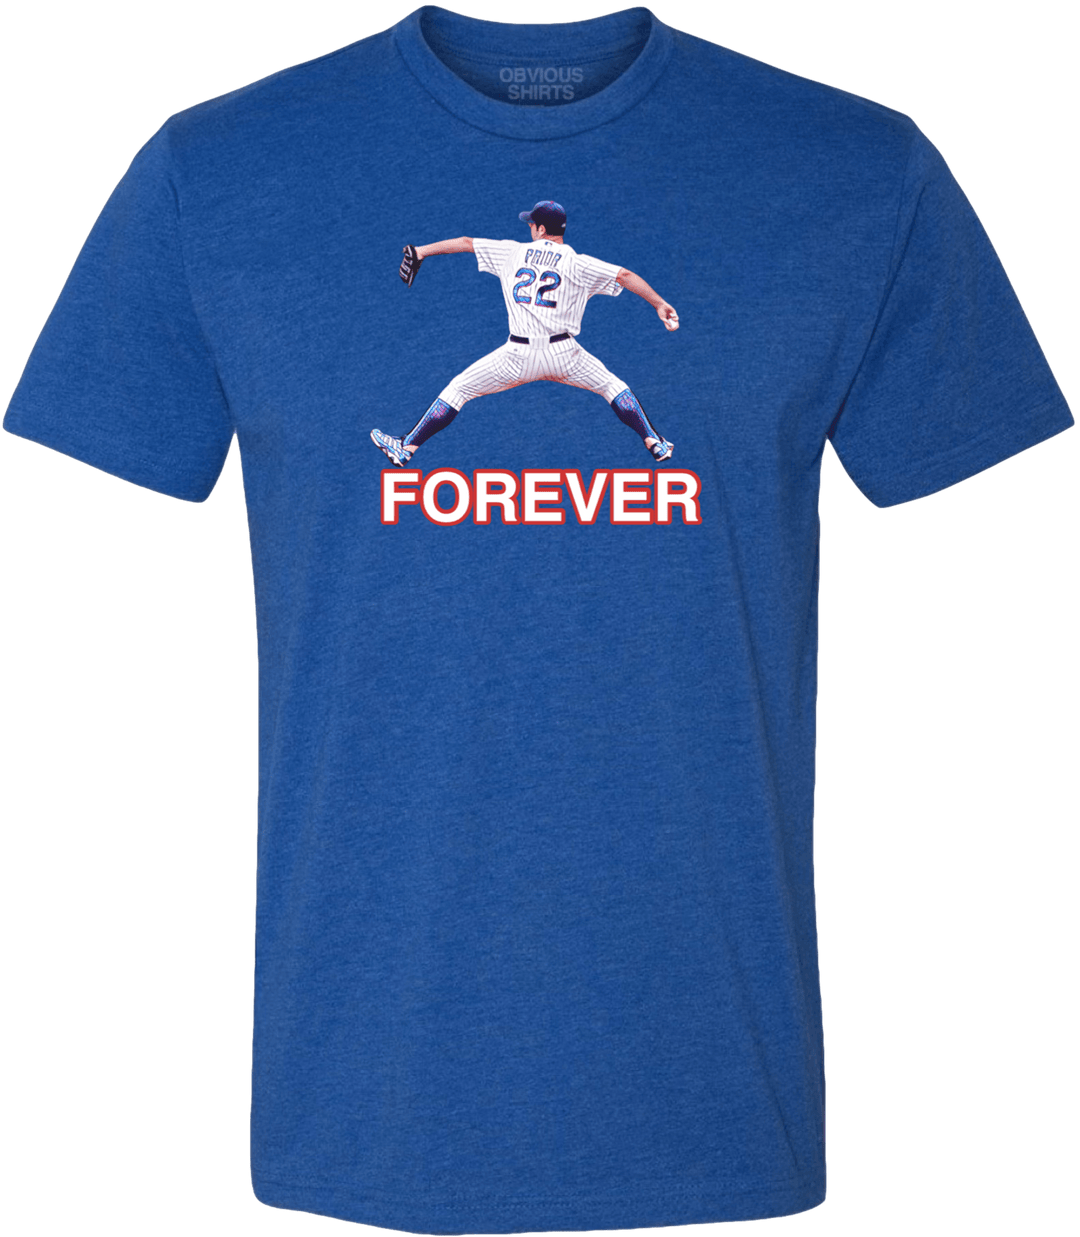 MARK PRIOR FOREVER (WIND UP). - OBVIOUS SHIRTS.